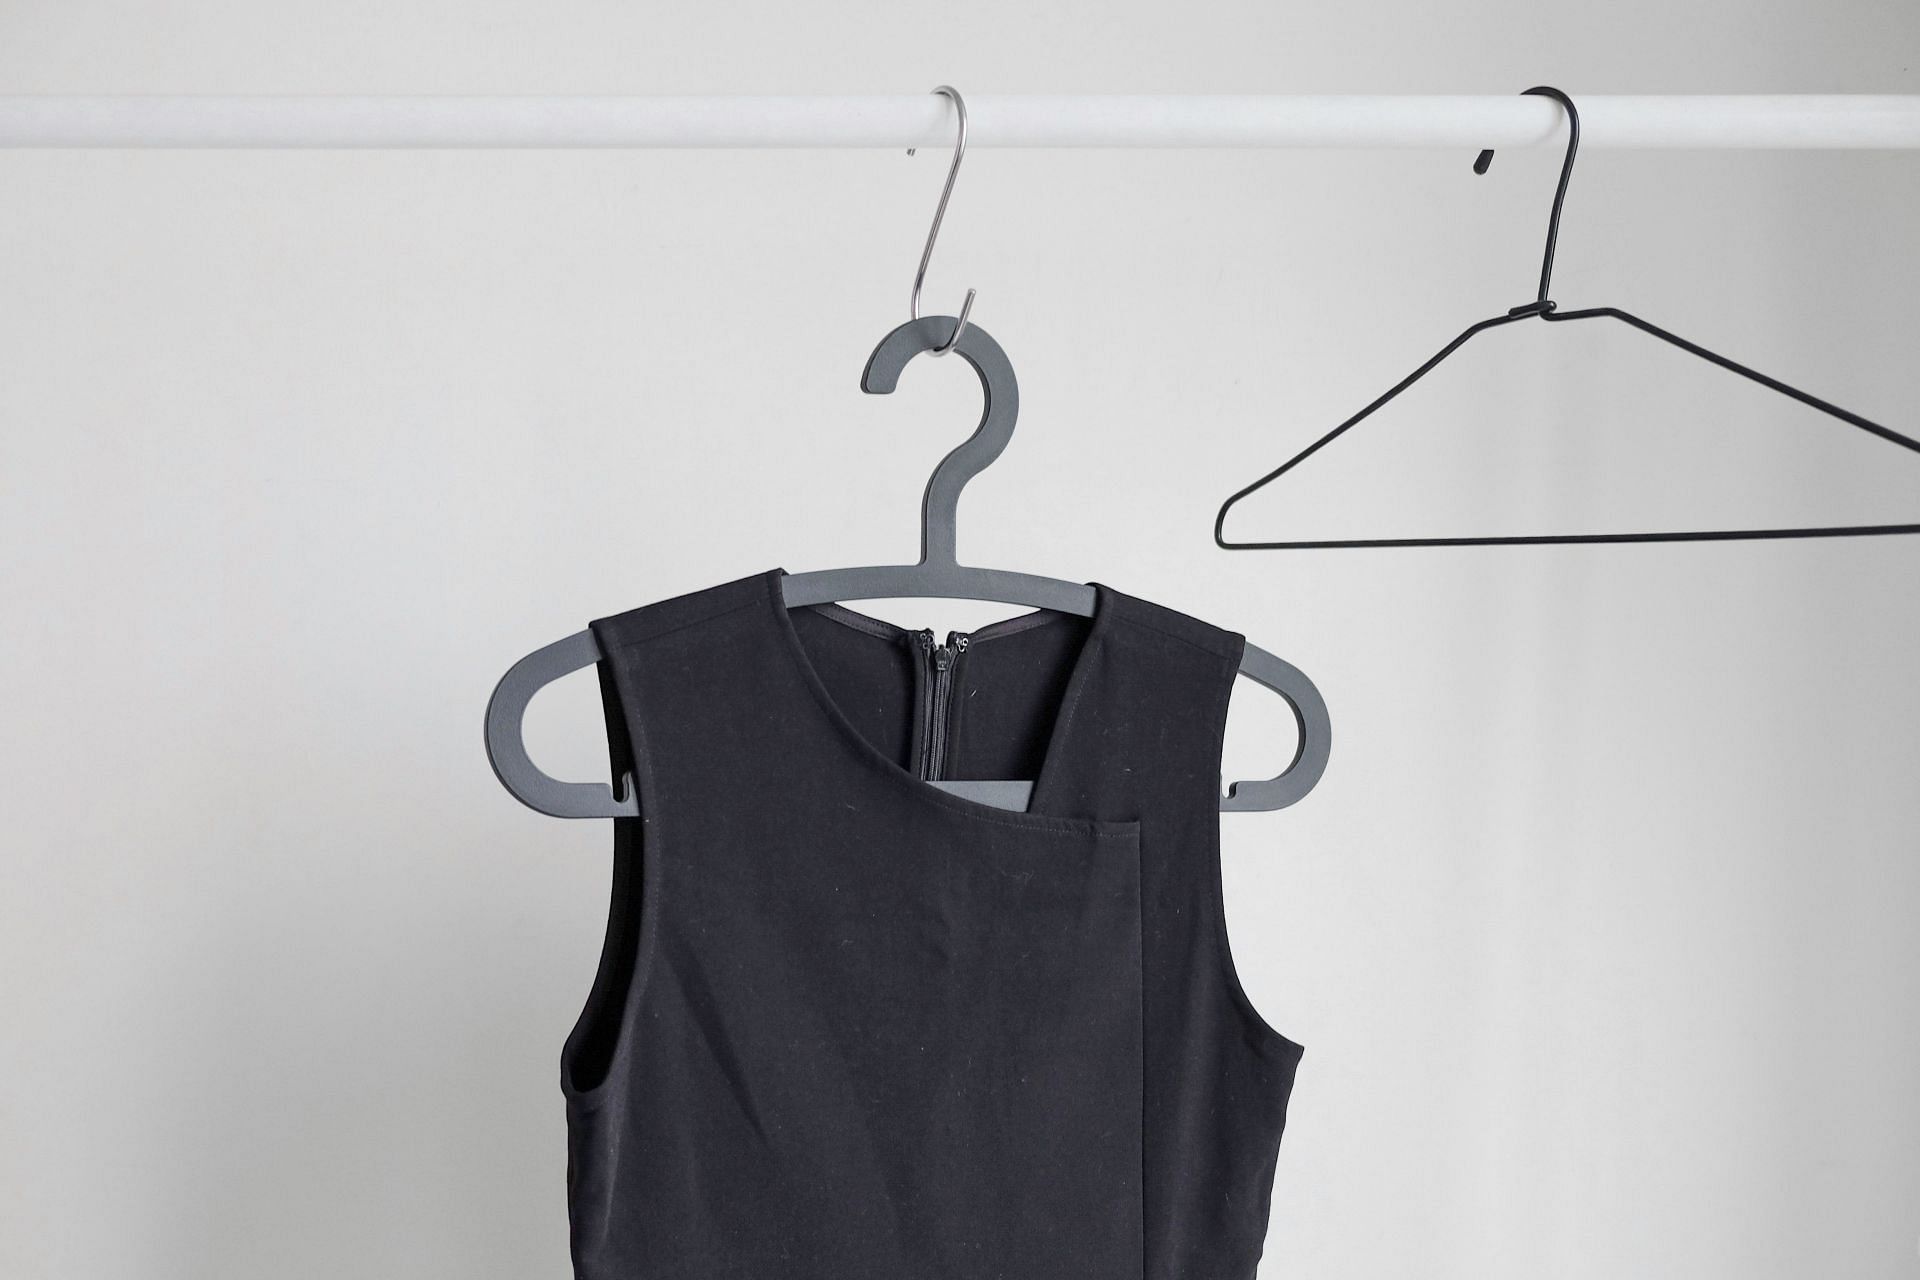 What is the Coat Hanger Pain ? (Image by Henry and Co./Unsplash)